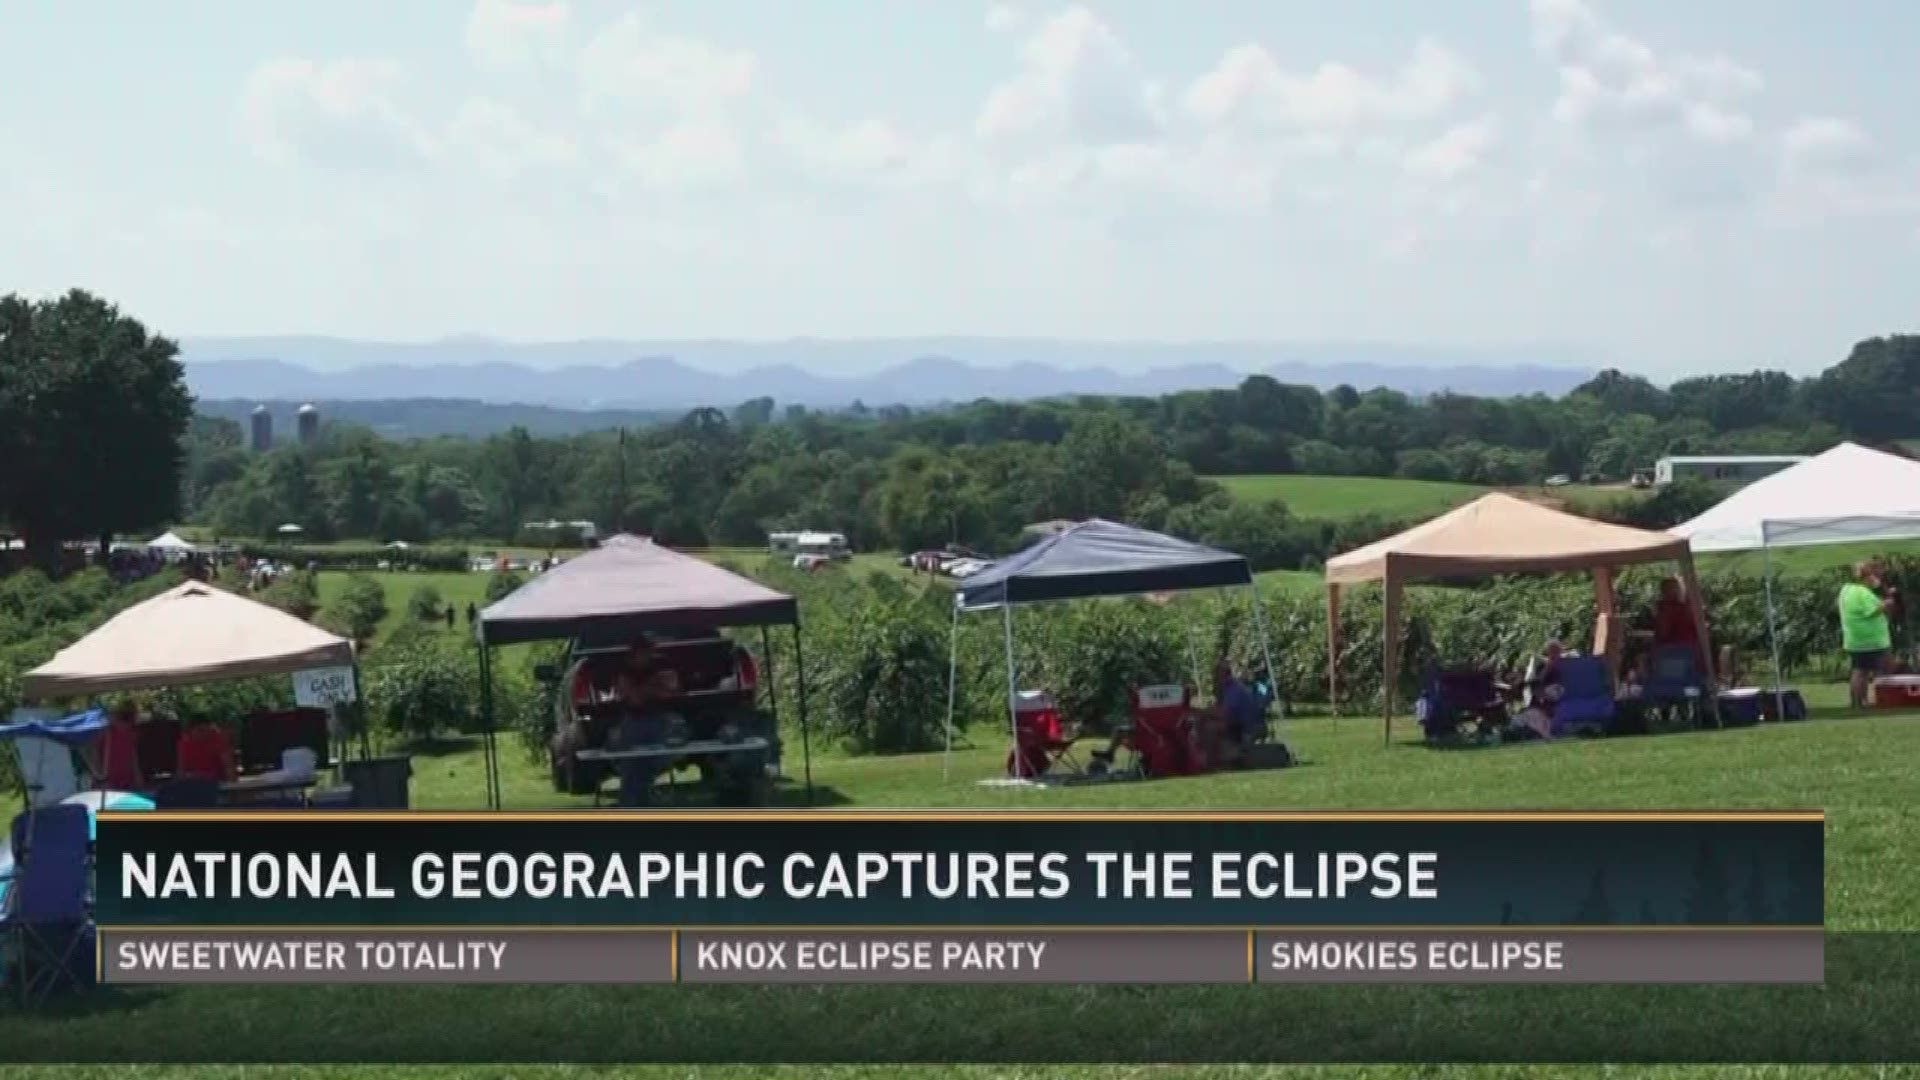 Aug. 21, 2017: A team from National Geographic documented the total solar eclipse from Tsali Notch Vineyard.